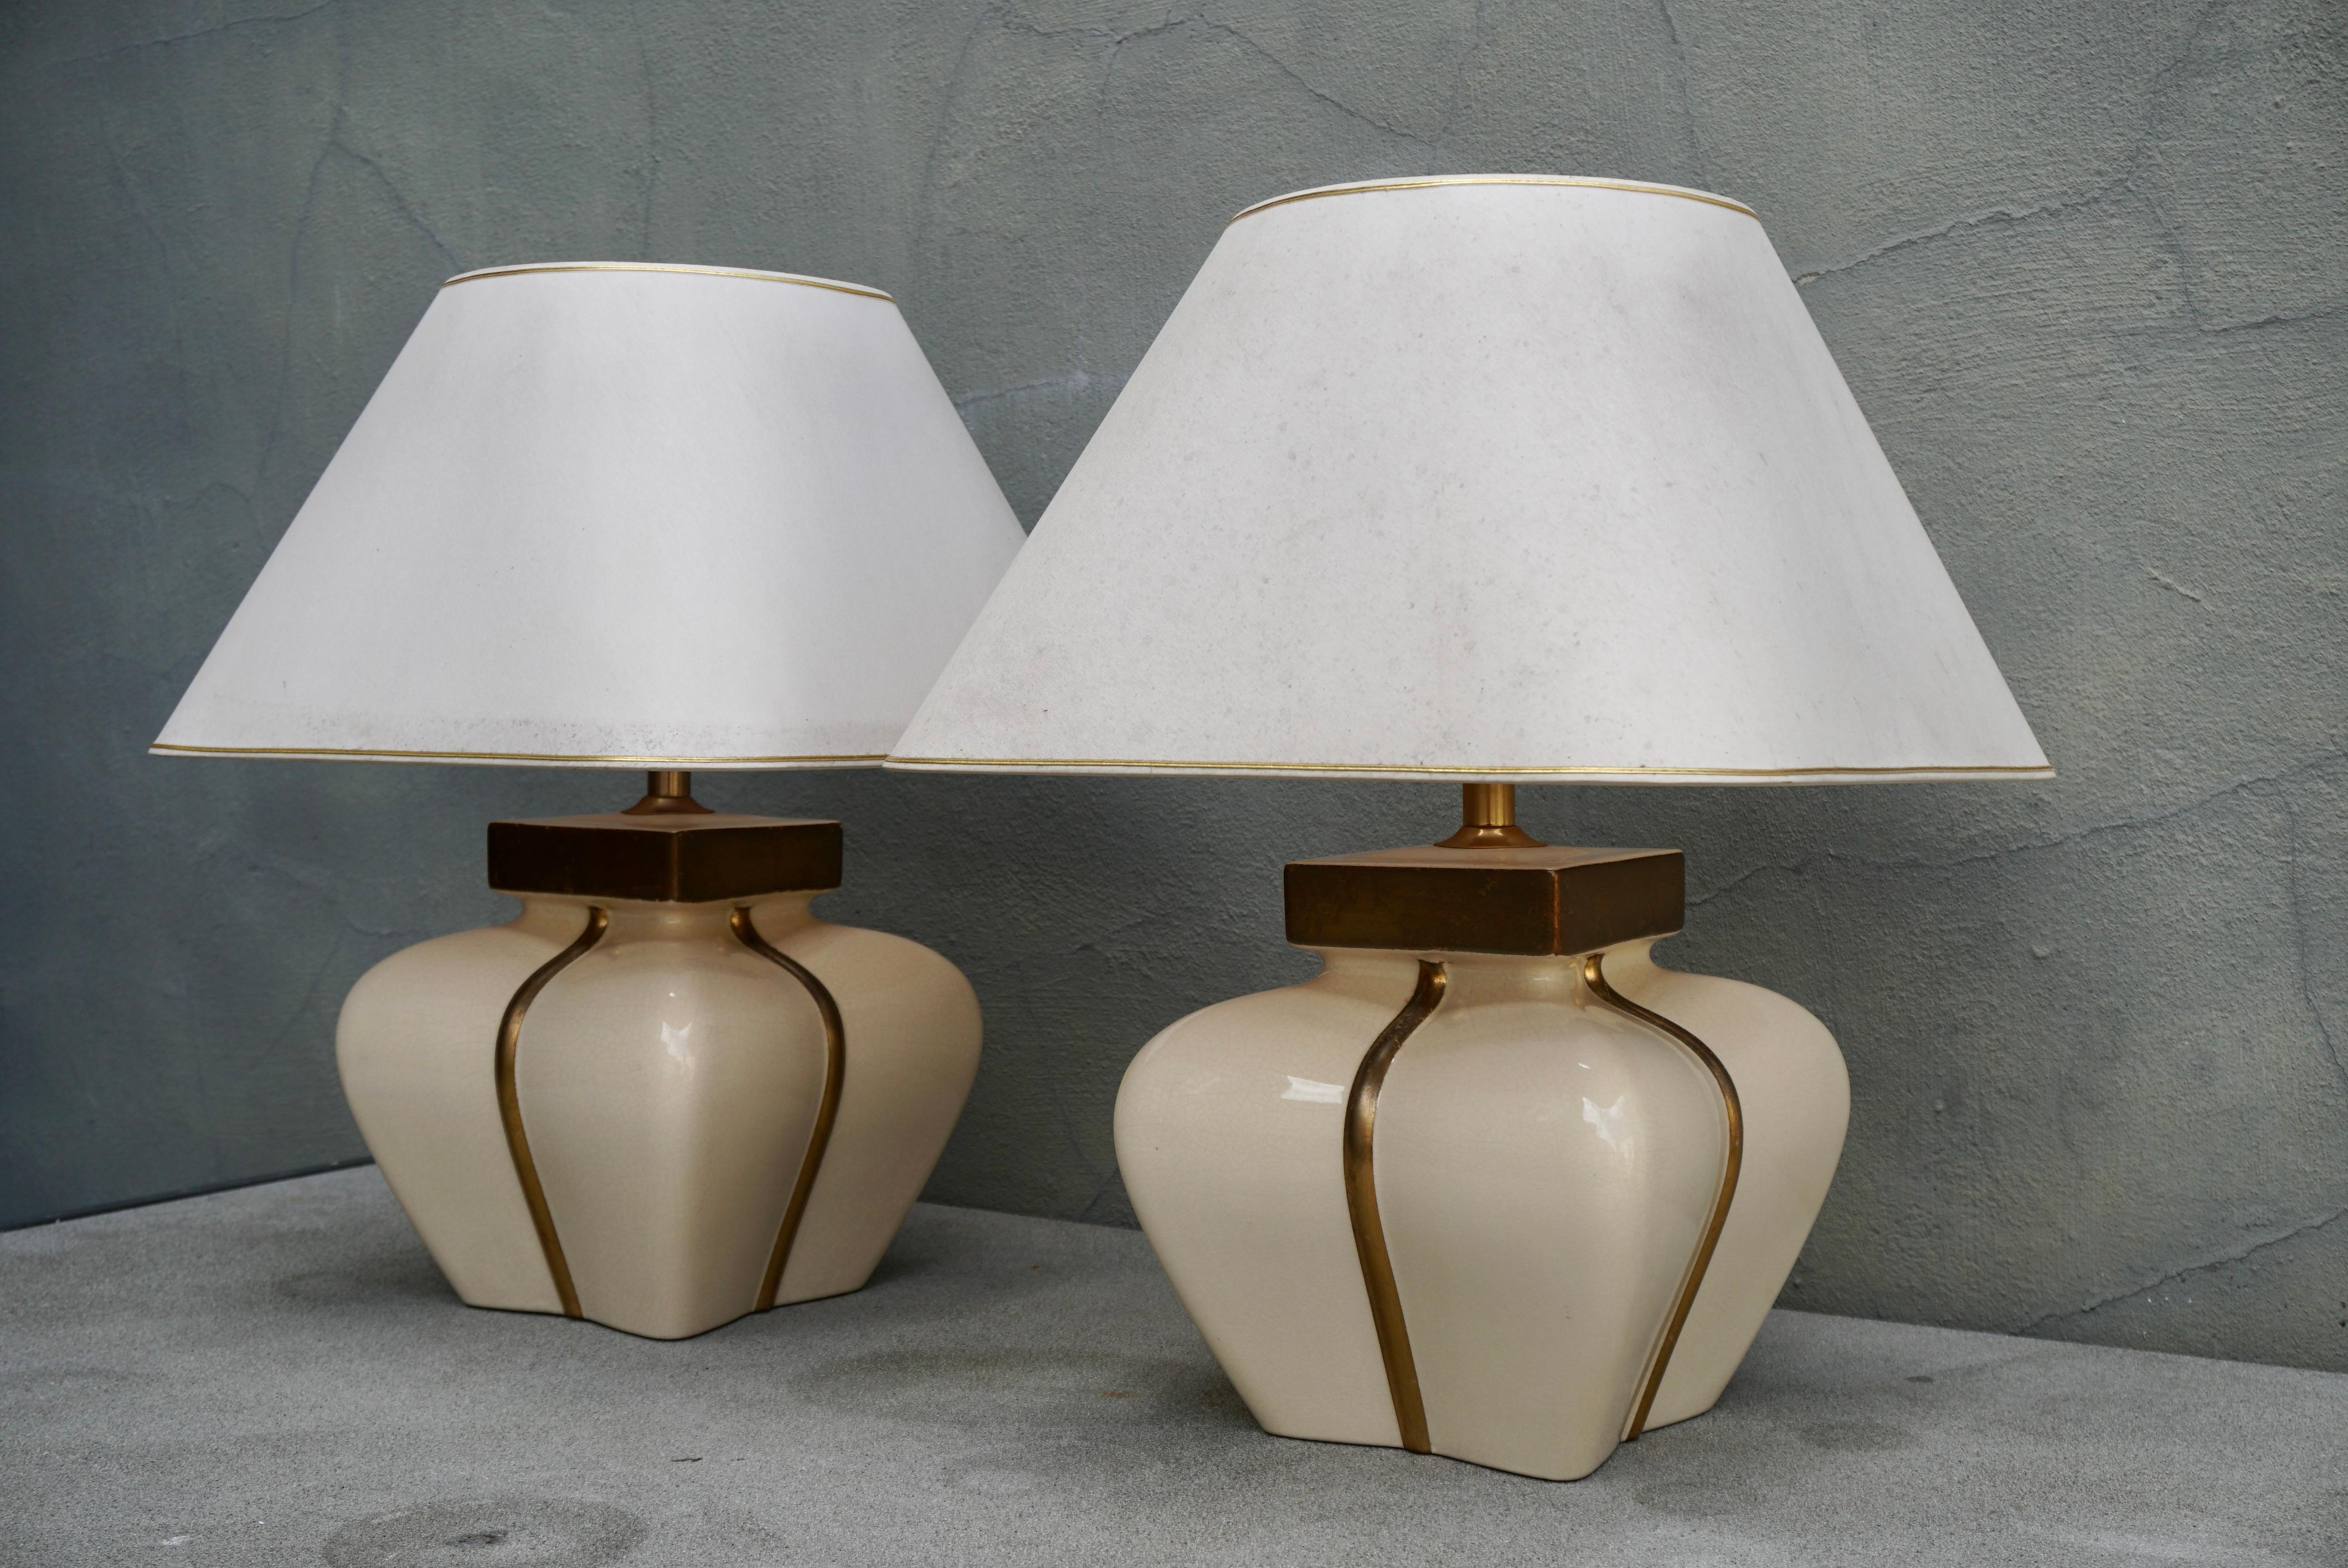 A pair tall high end French ceramic table lamps in cream and gold color.
Design: Maison Le Dauphin 
Style:Regency, Vintage, Mid Century 
Luxury lamps made of ceramic and gold gilded by Maison Le Dauphin Marked: Both lamps are marked on the back of